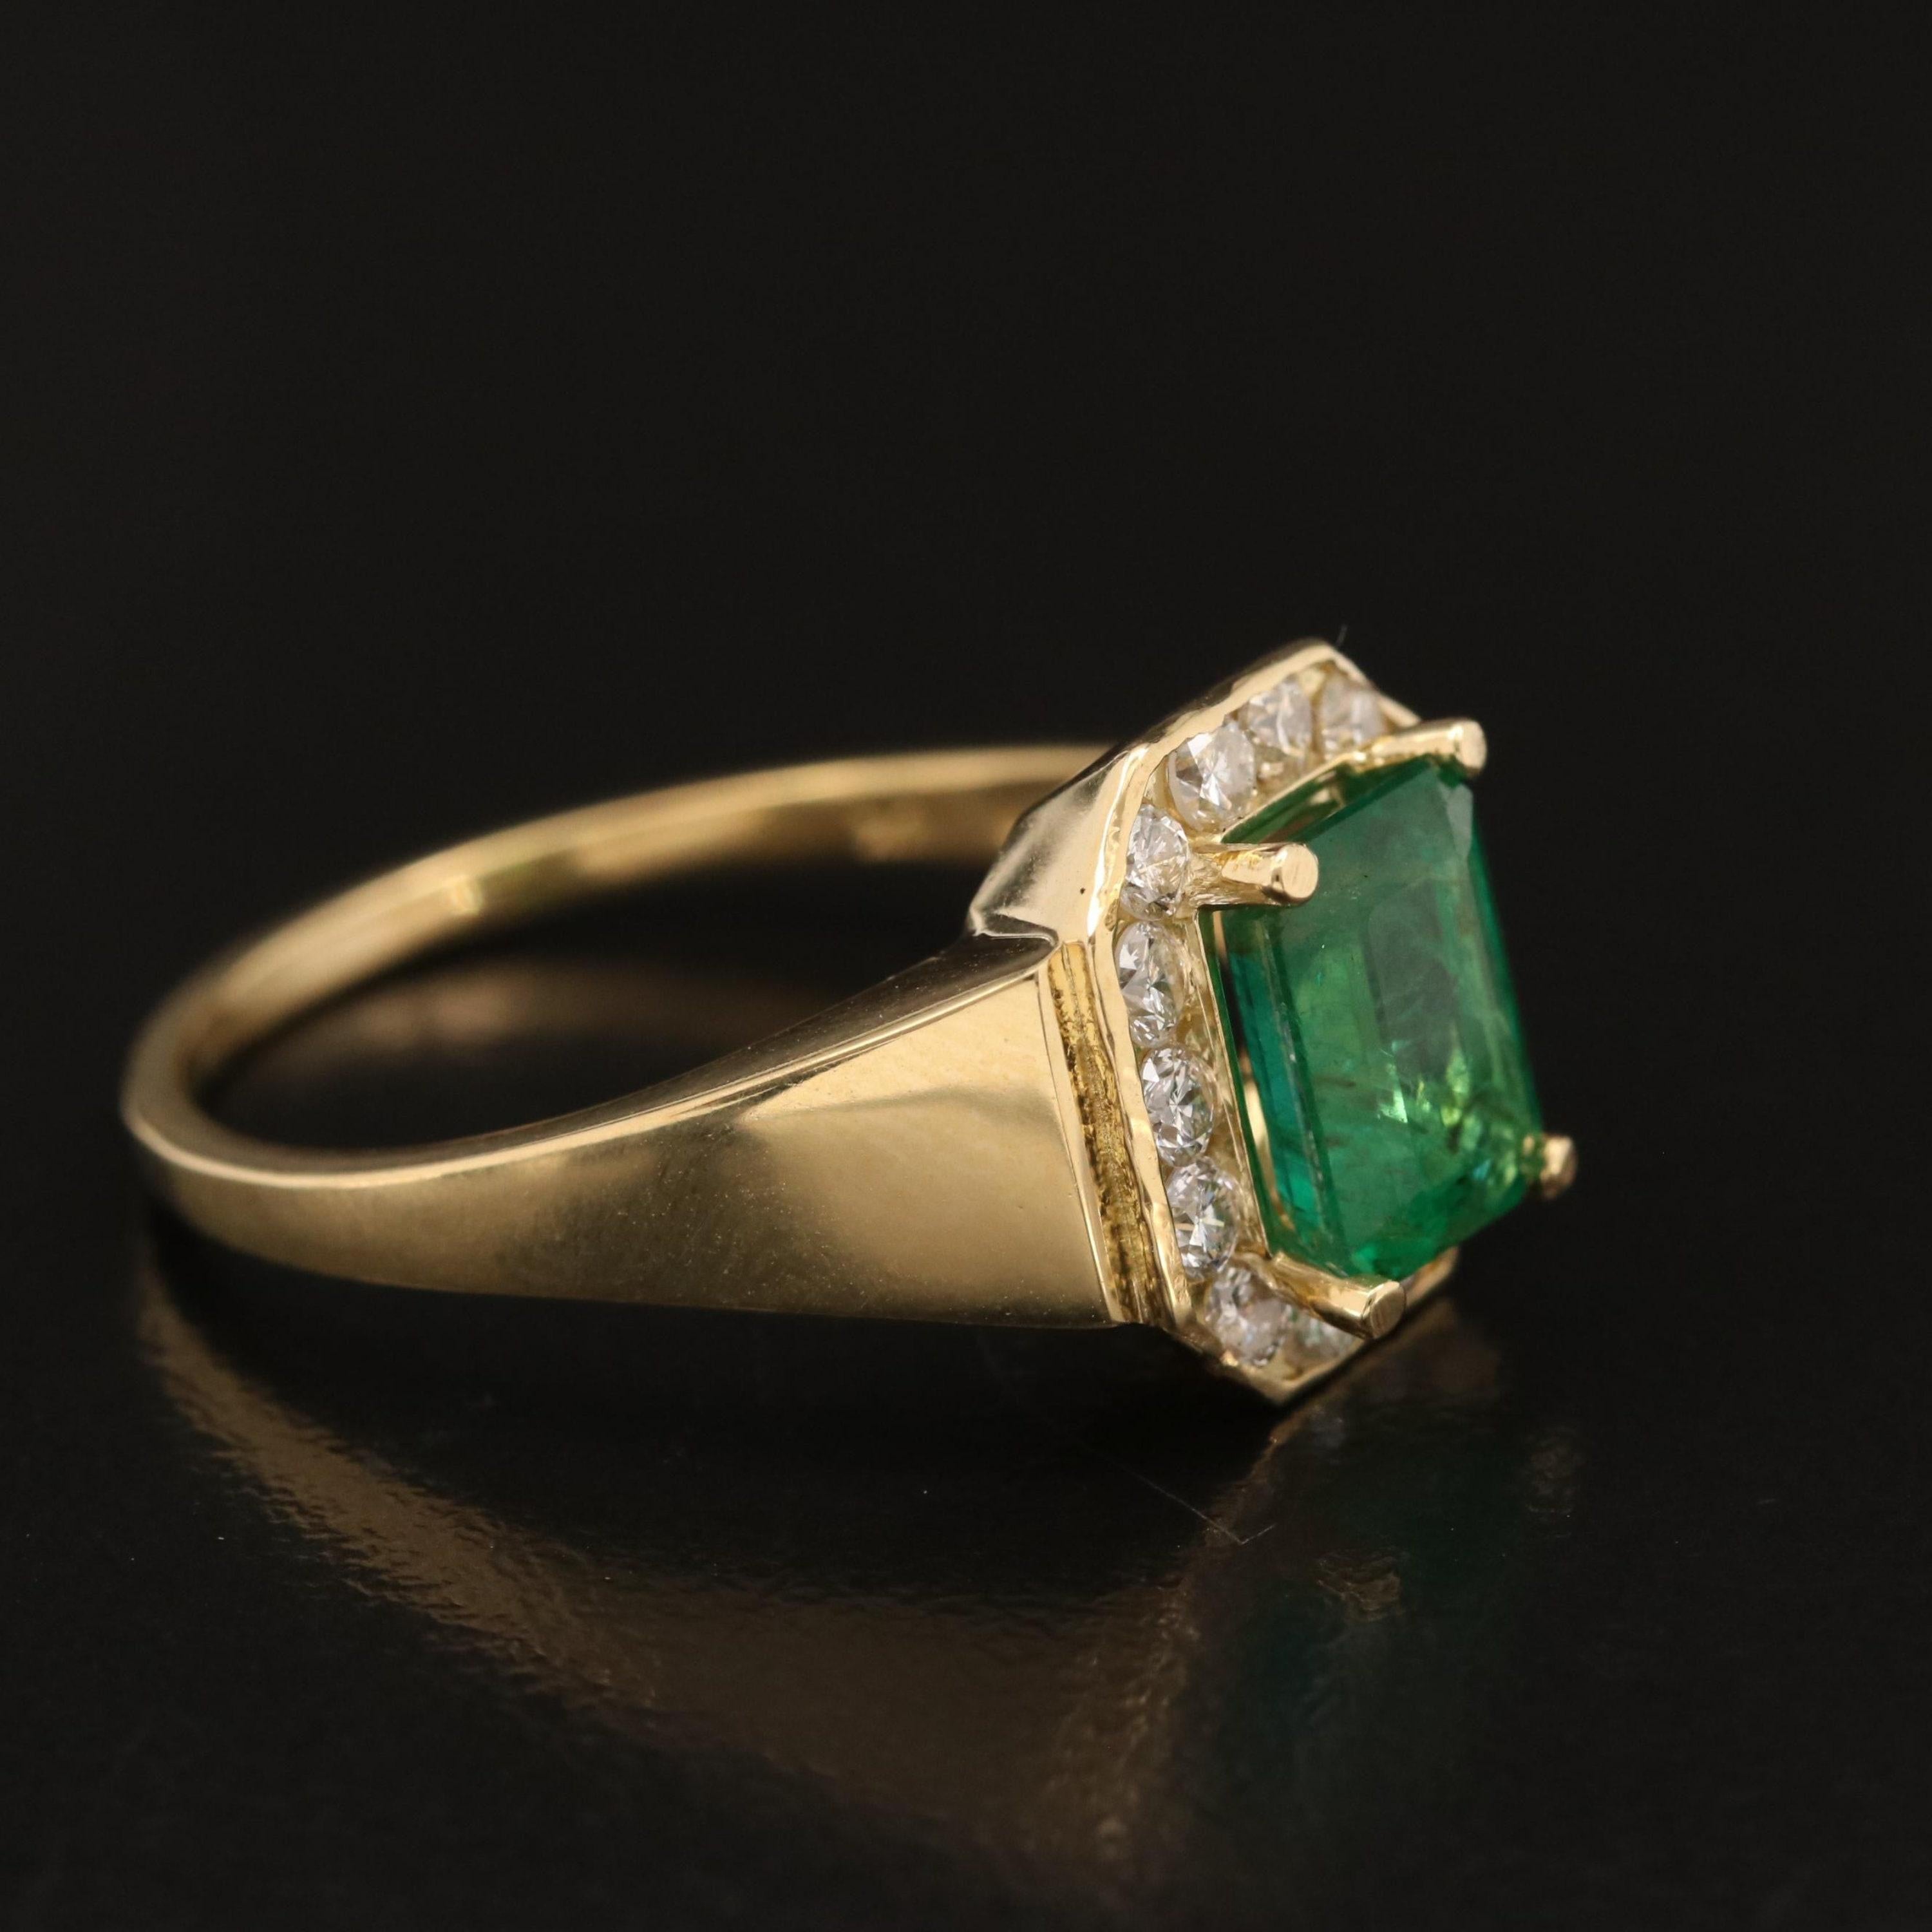 For Sale:  Halo Emerald Diamond Engagement Ring, Emerald Cut Emerald Wedding Ring for Her 4